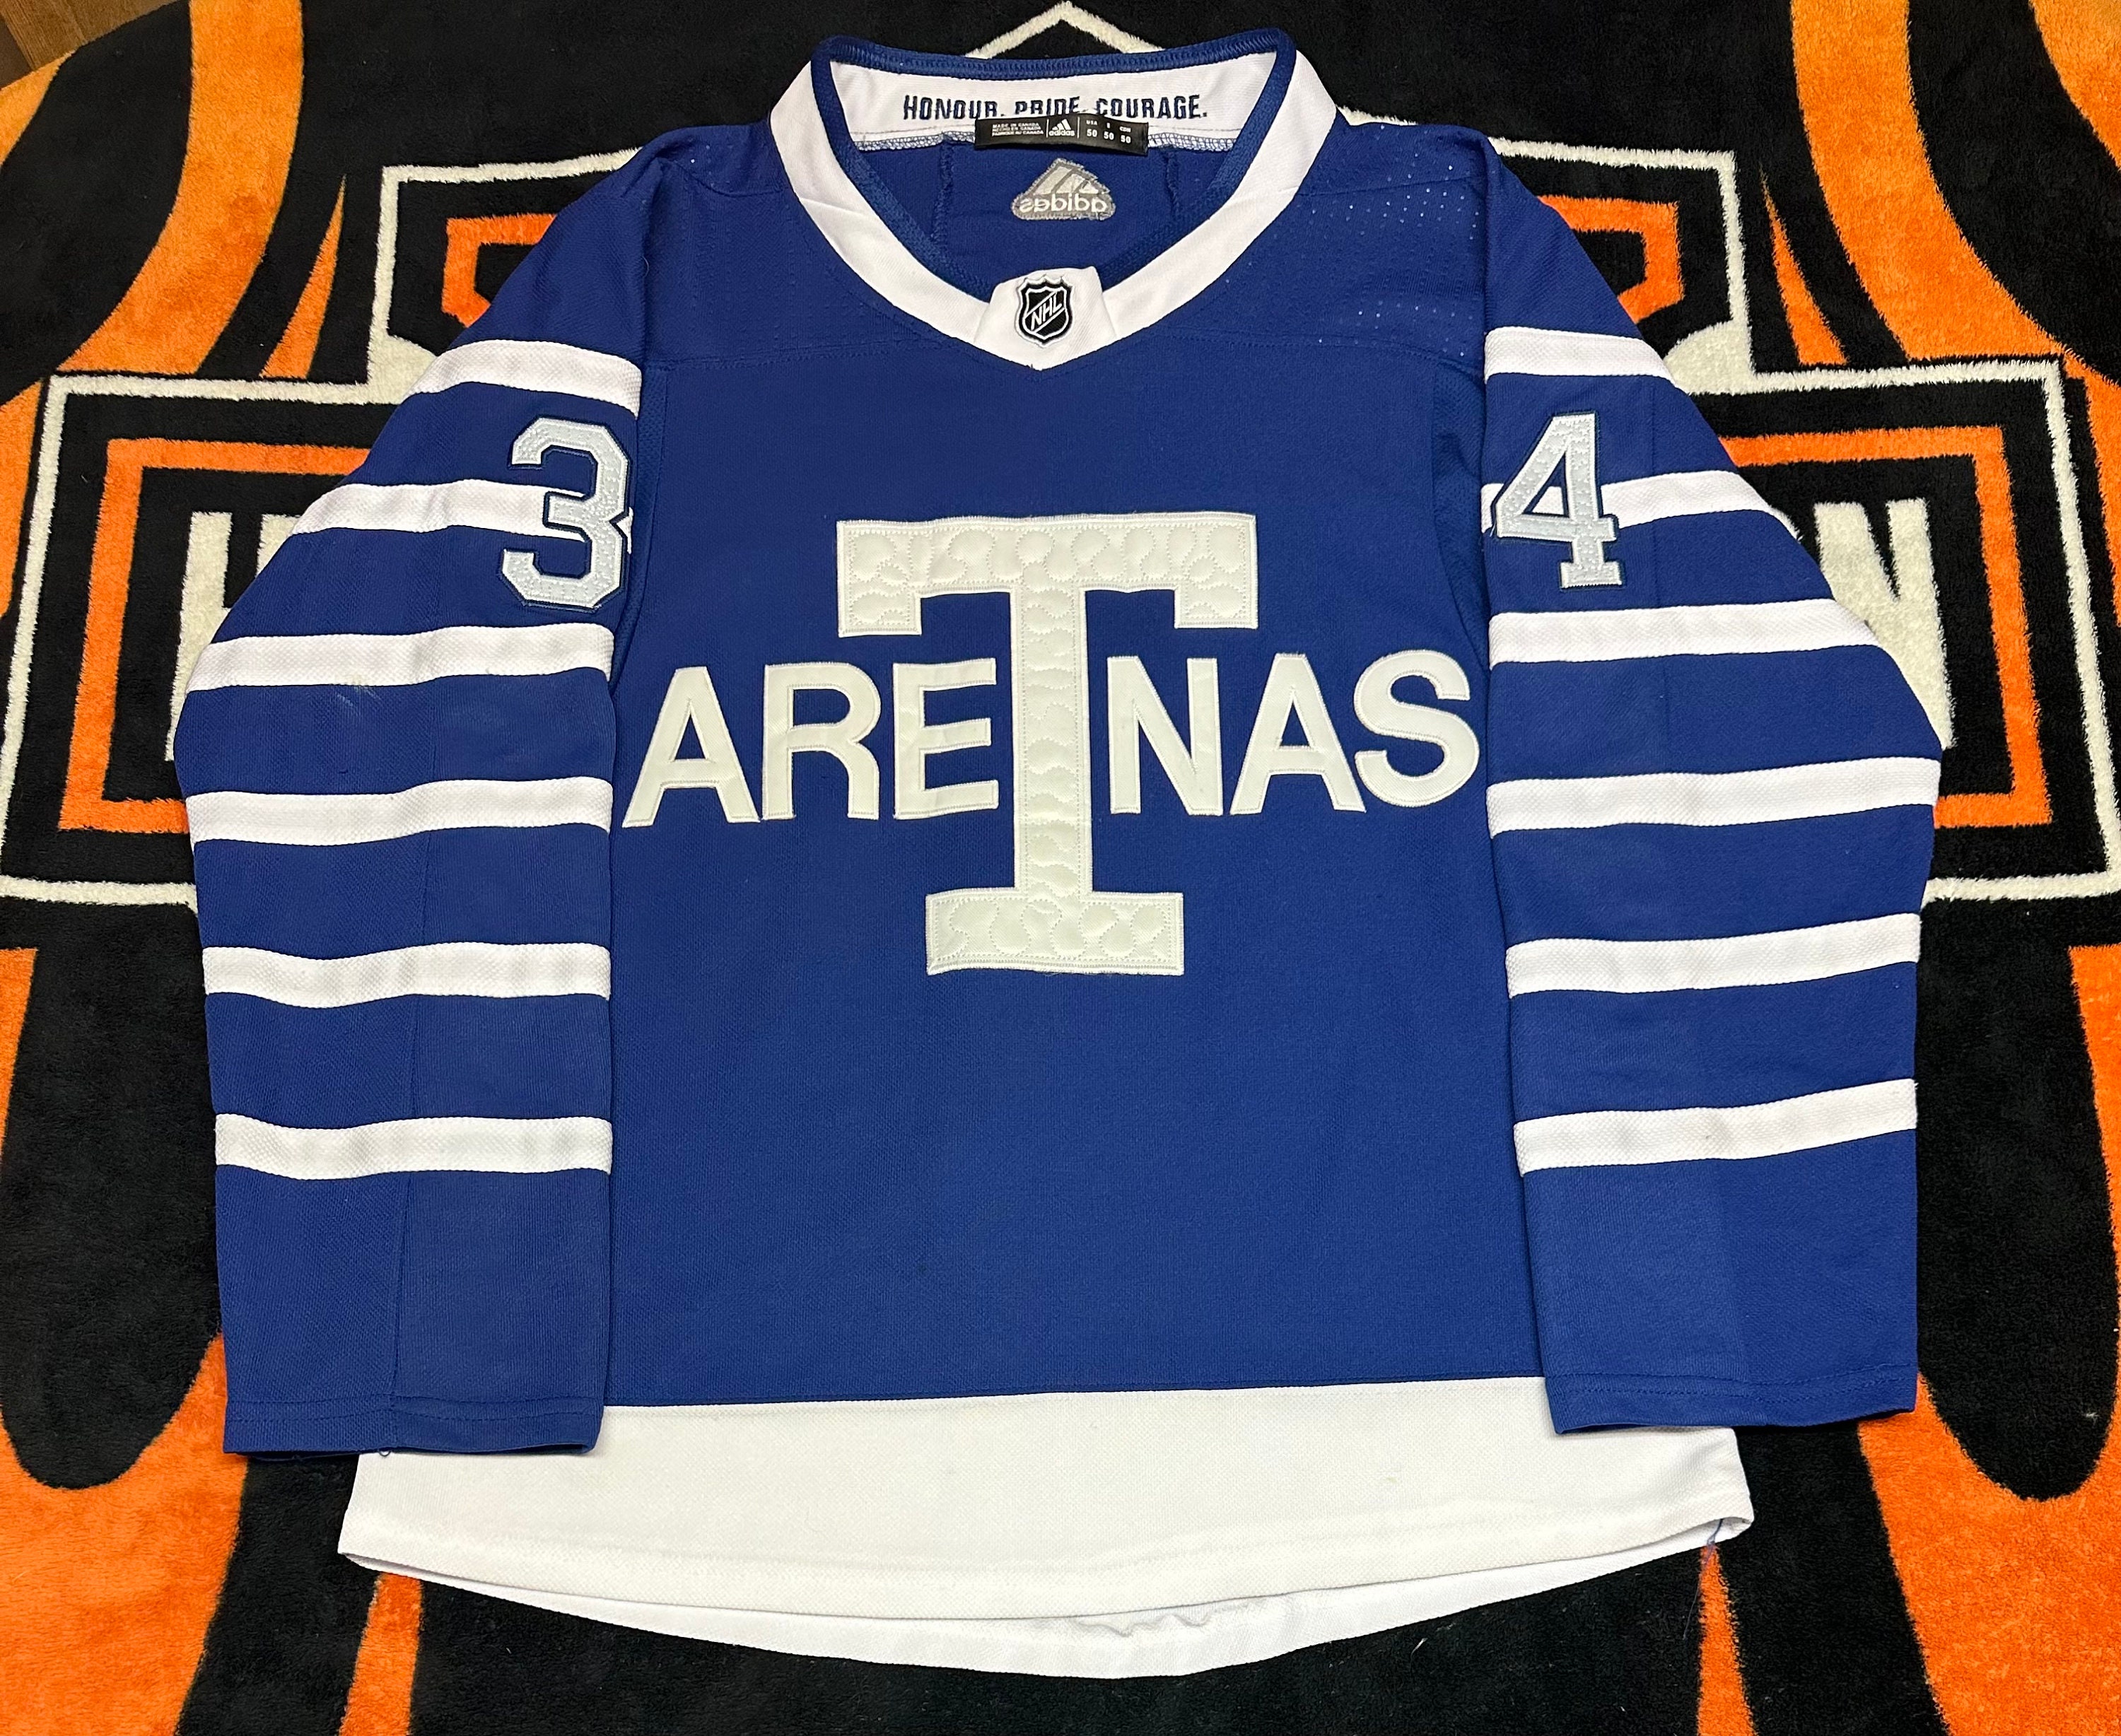 Re: Please Add ADIDAS Variant of Certain CCM NHL Jerseys in